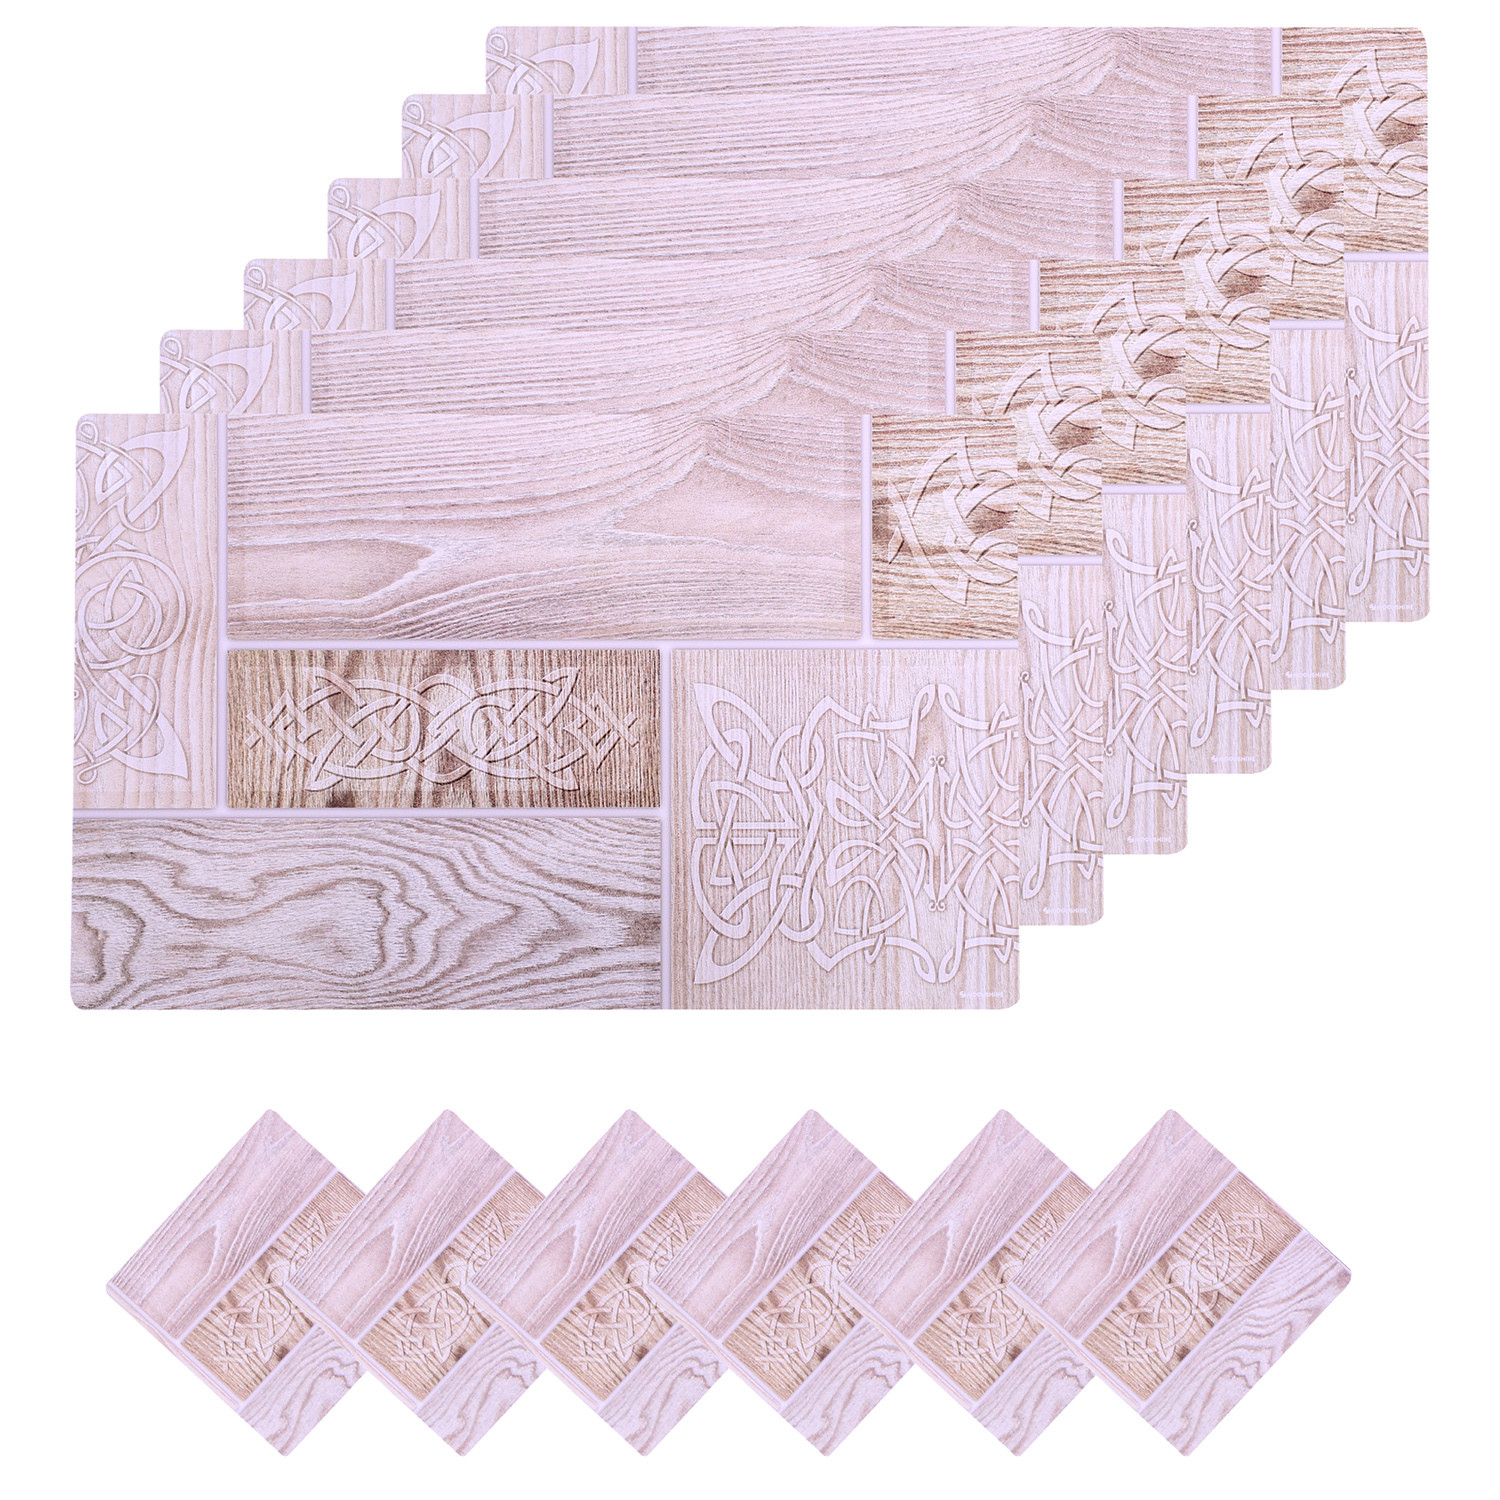 Kuber Industries Placemat | Table Placemats with Coasters | Table Placemats with Tea Coasters | Dining Table Placemats & Coasters Set | Wood Placemat | 12 Piece Set | Cream